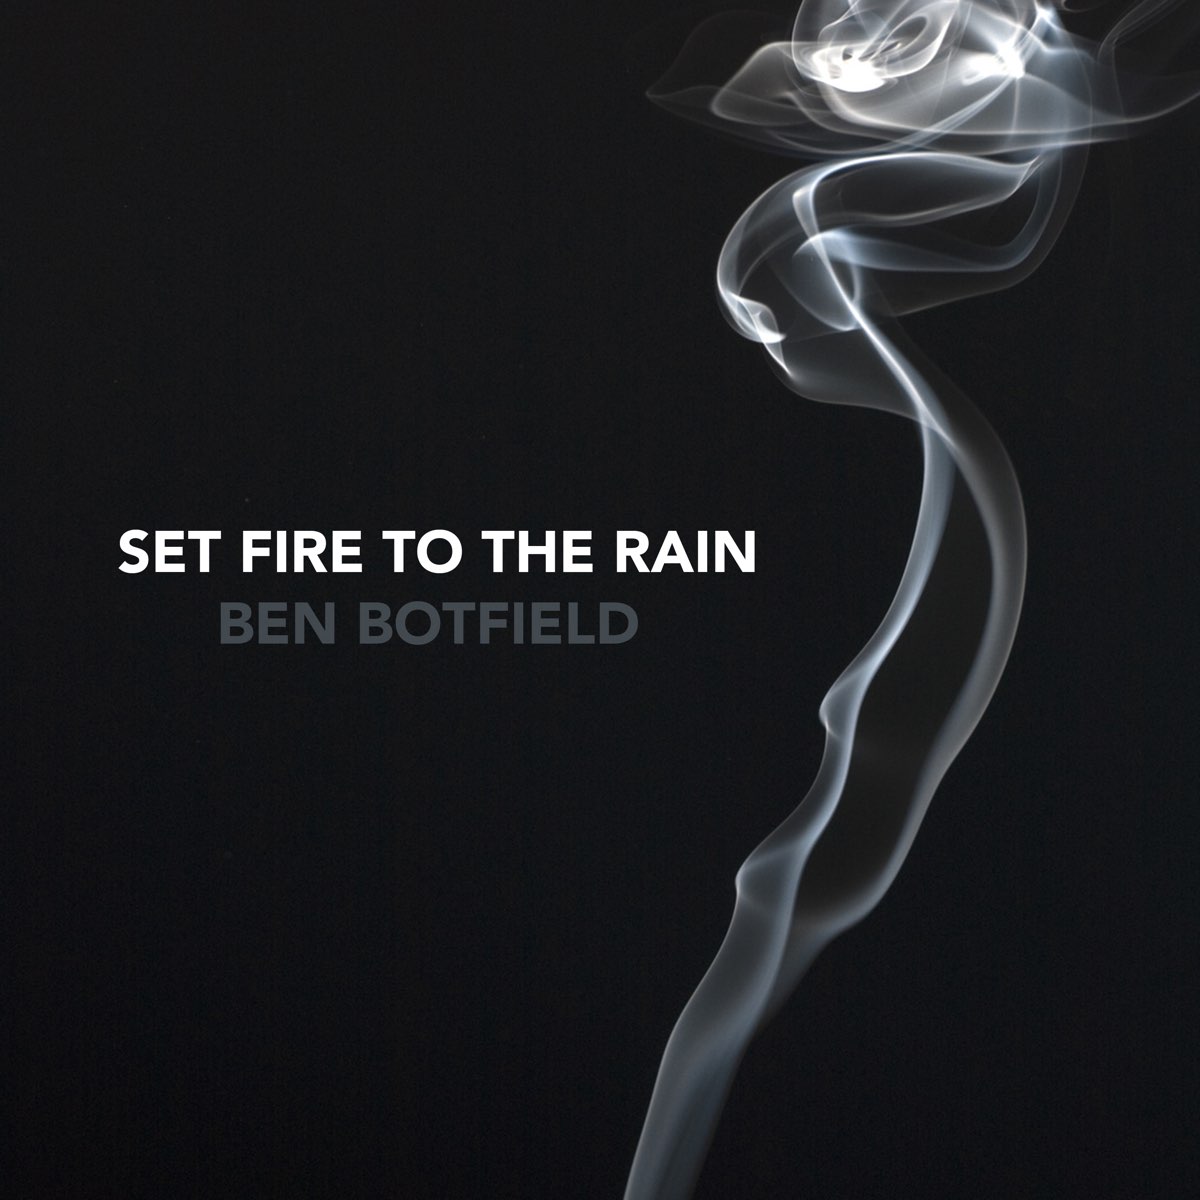 Set Fire to the Rain текст. Set Fire to the Rain. No resolve Set Fire to the Rain. Set Fire to the Rain Spotify.